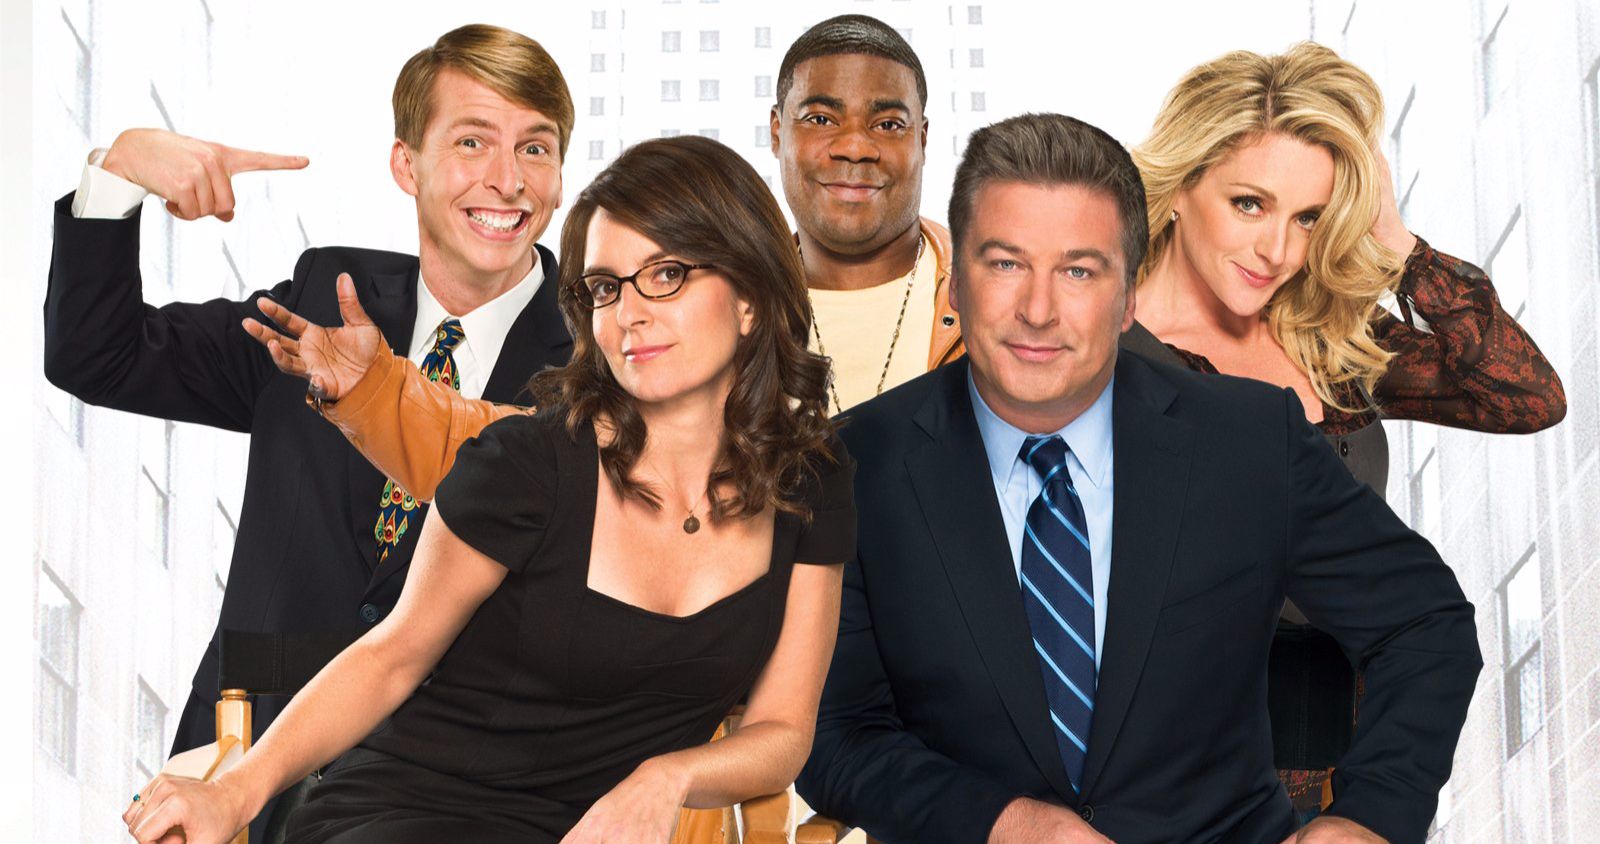 30 Rock Will Return on NBC's Peacock with a New Hour-Long Episode